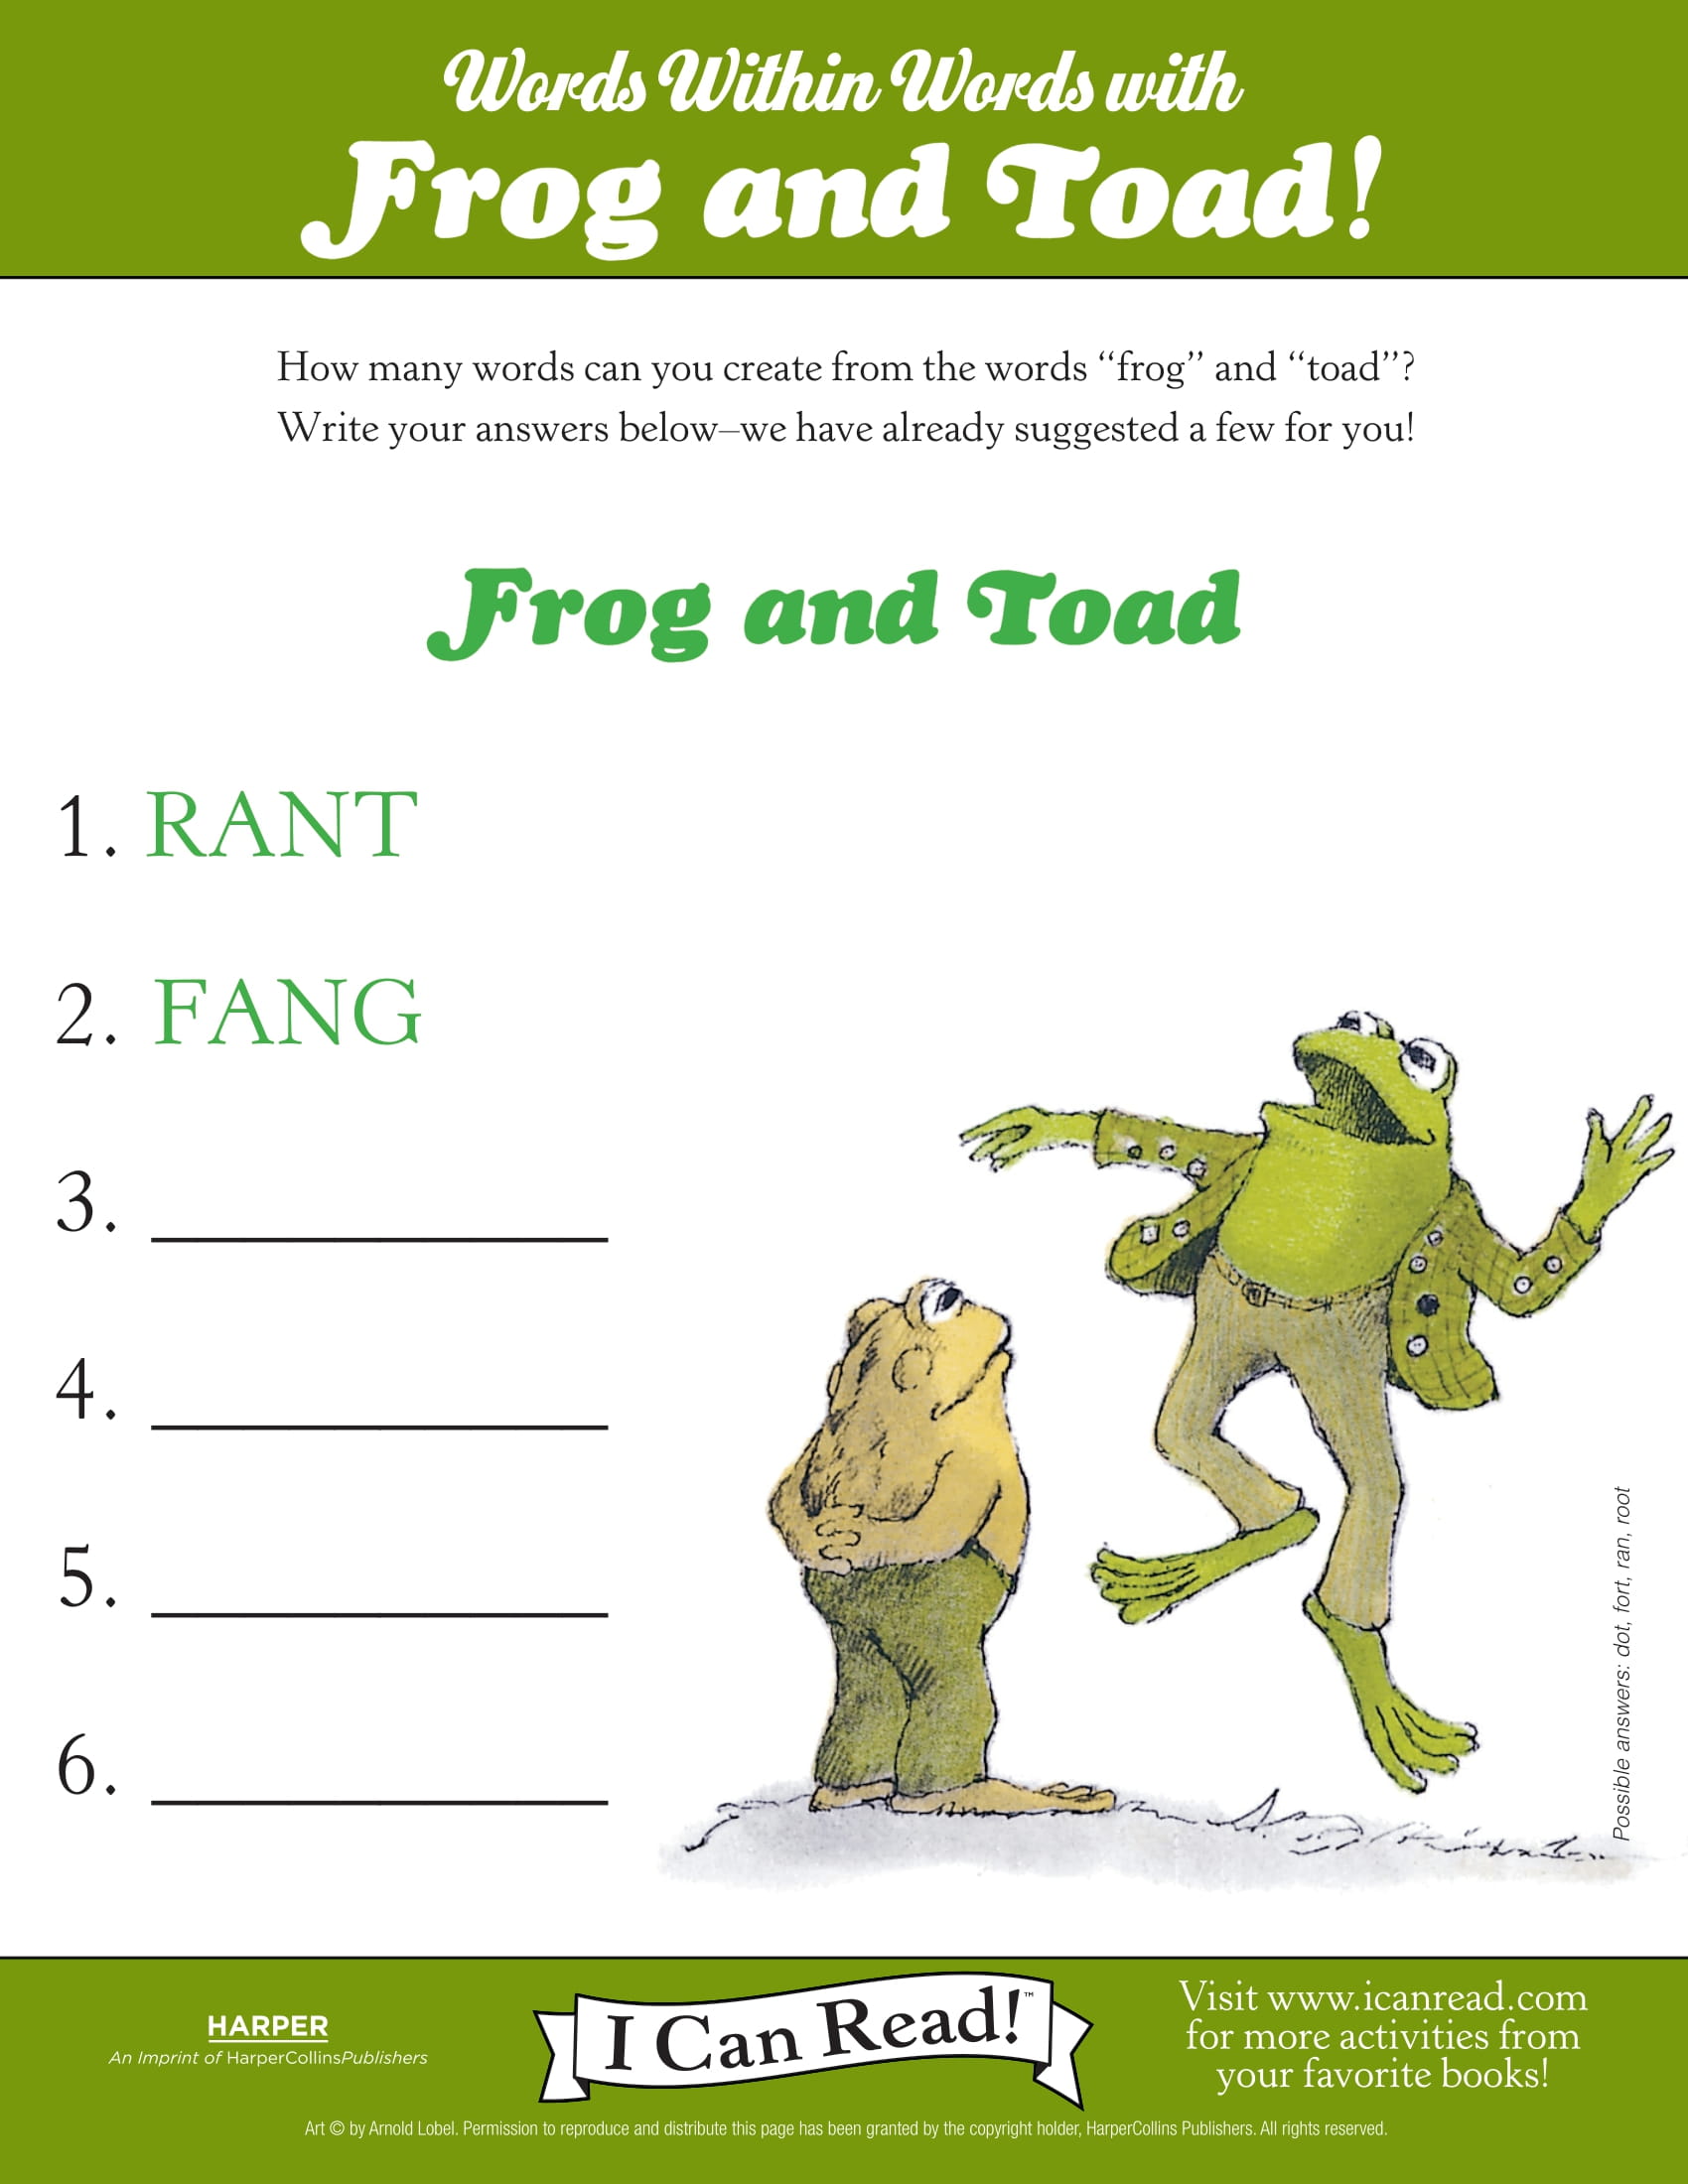 Words within words. Frog and toad схема вязания. Frog and toad are friends. Toad Sounds Word Kids. Frog and toad книга Julia.